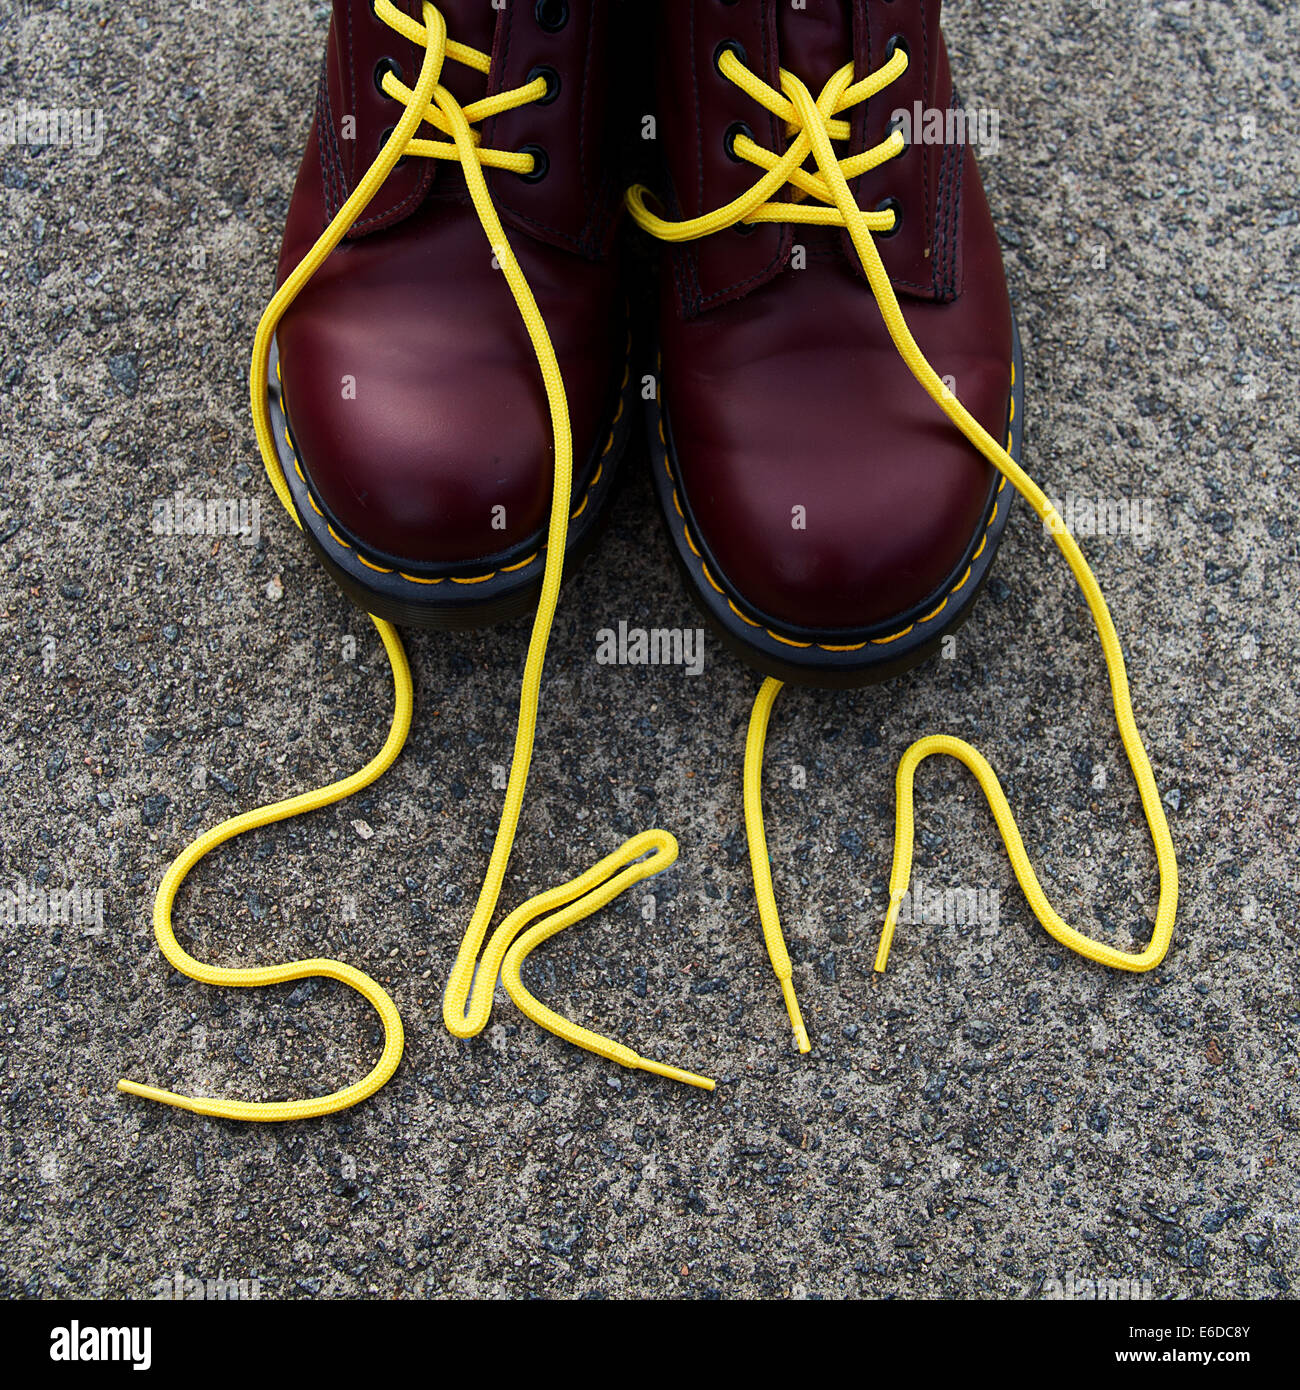 Red Dr Martens Boots With Yellow Laces Spelling Skin On Paving Stone Stock Photo Alamy